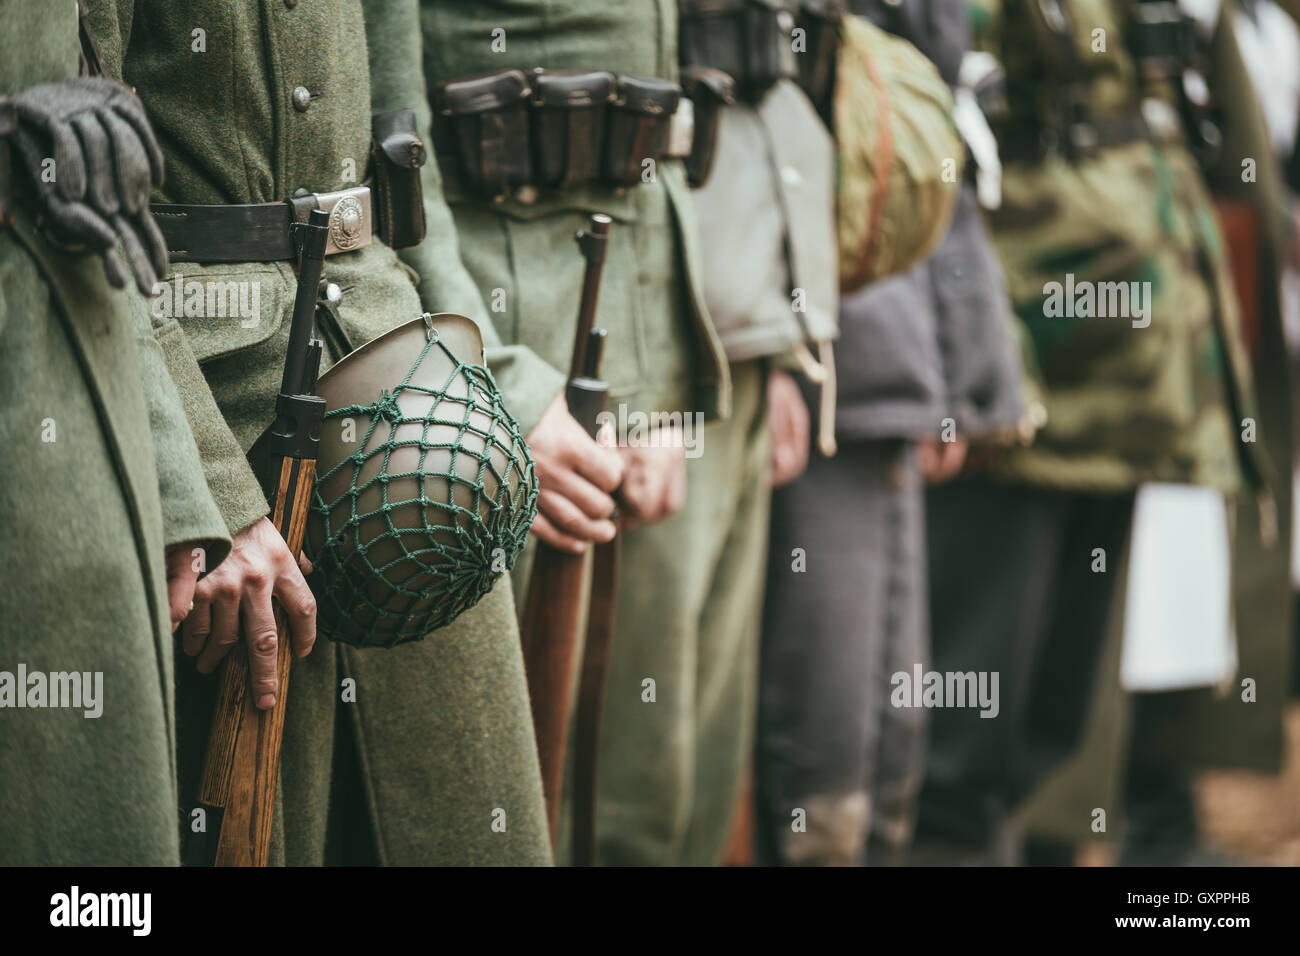 Close Up Of German Military Ammunition Of A German Soldier. Unidentified Re-enactors Dressed As World War Ii German Soldiers Sta Stock Photo